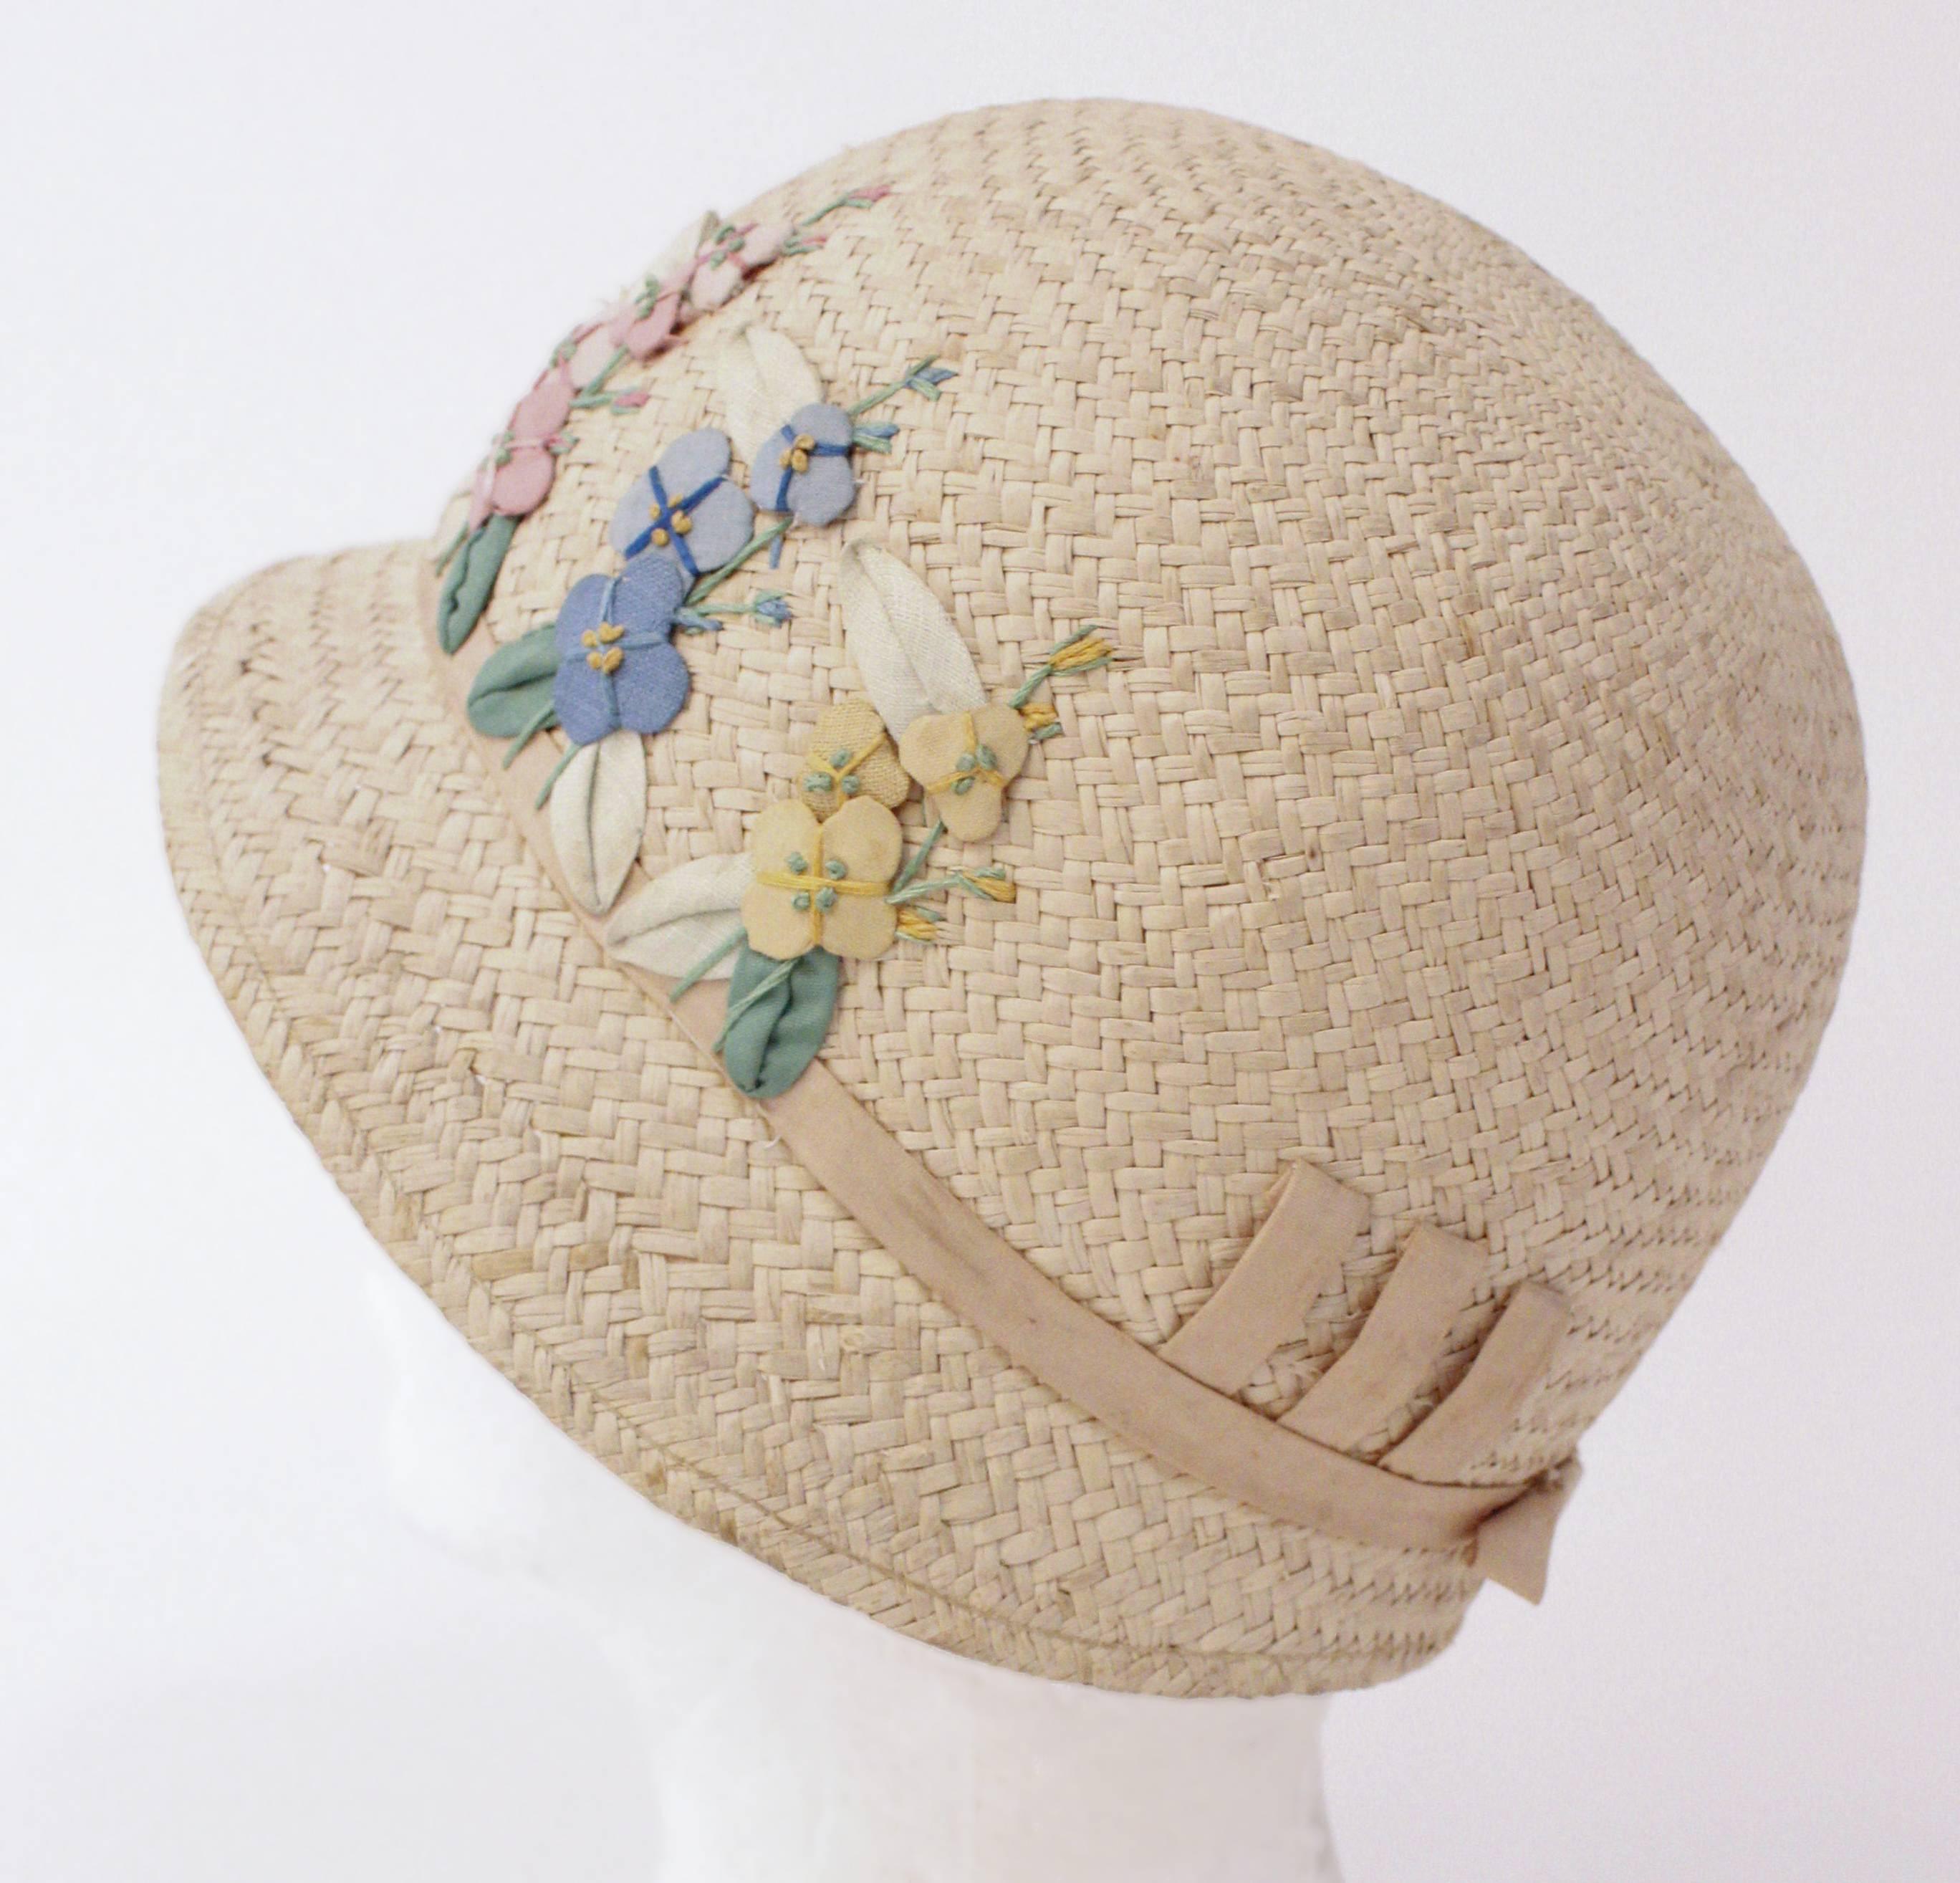 20s Child's Straw Embroidered Floral Cloche. Hand embellished. Very small.